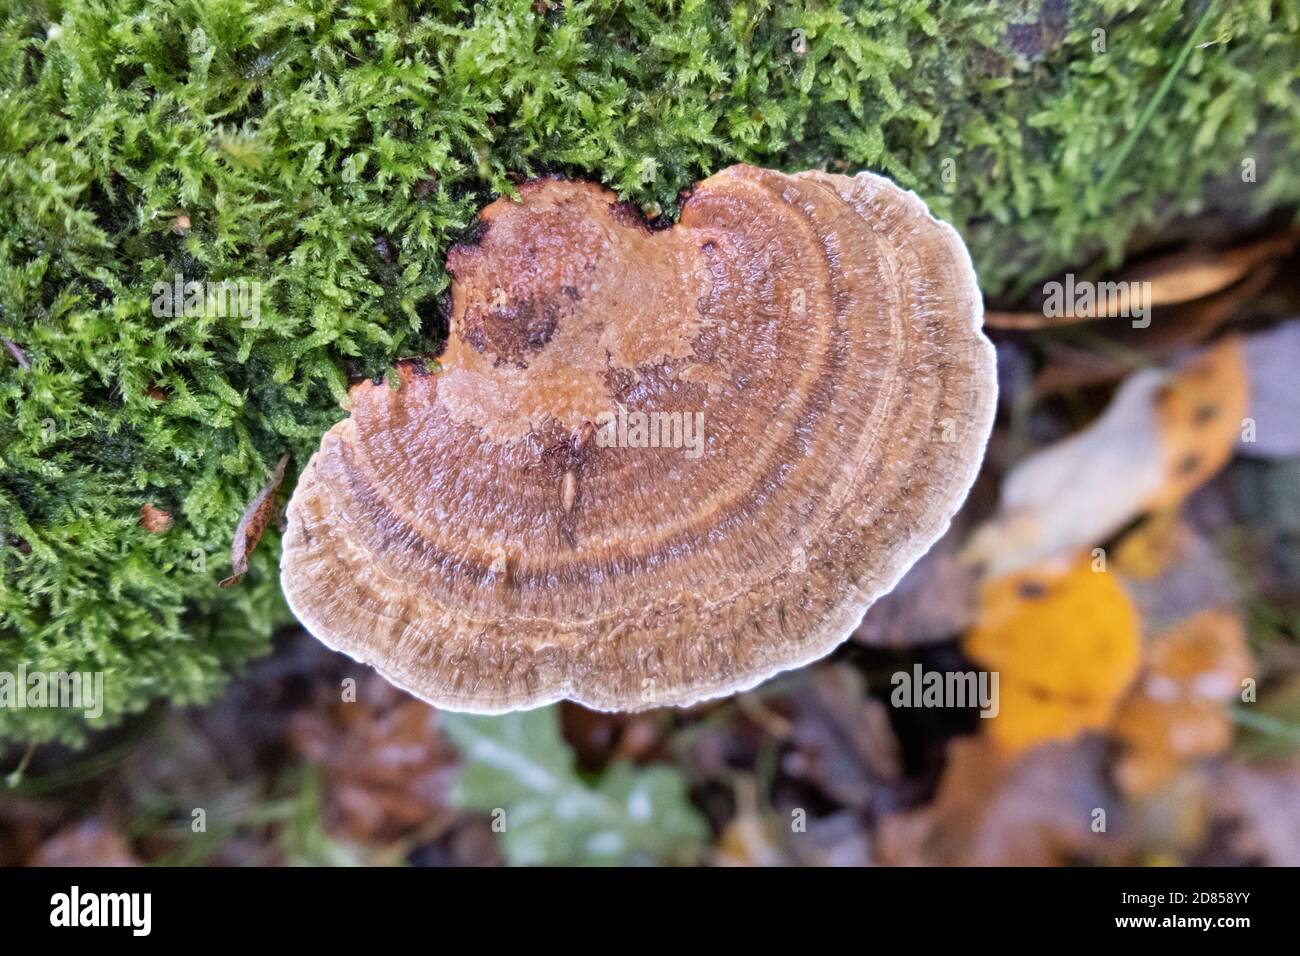 Very large Turkey Tail fungi also known as coriolus versicolor and polyporus versicolor,  immune boosting, spotted in the New Forest, England, UK. Stock Photo